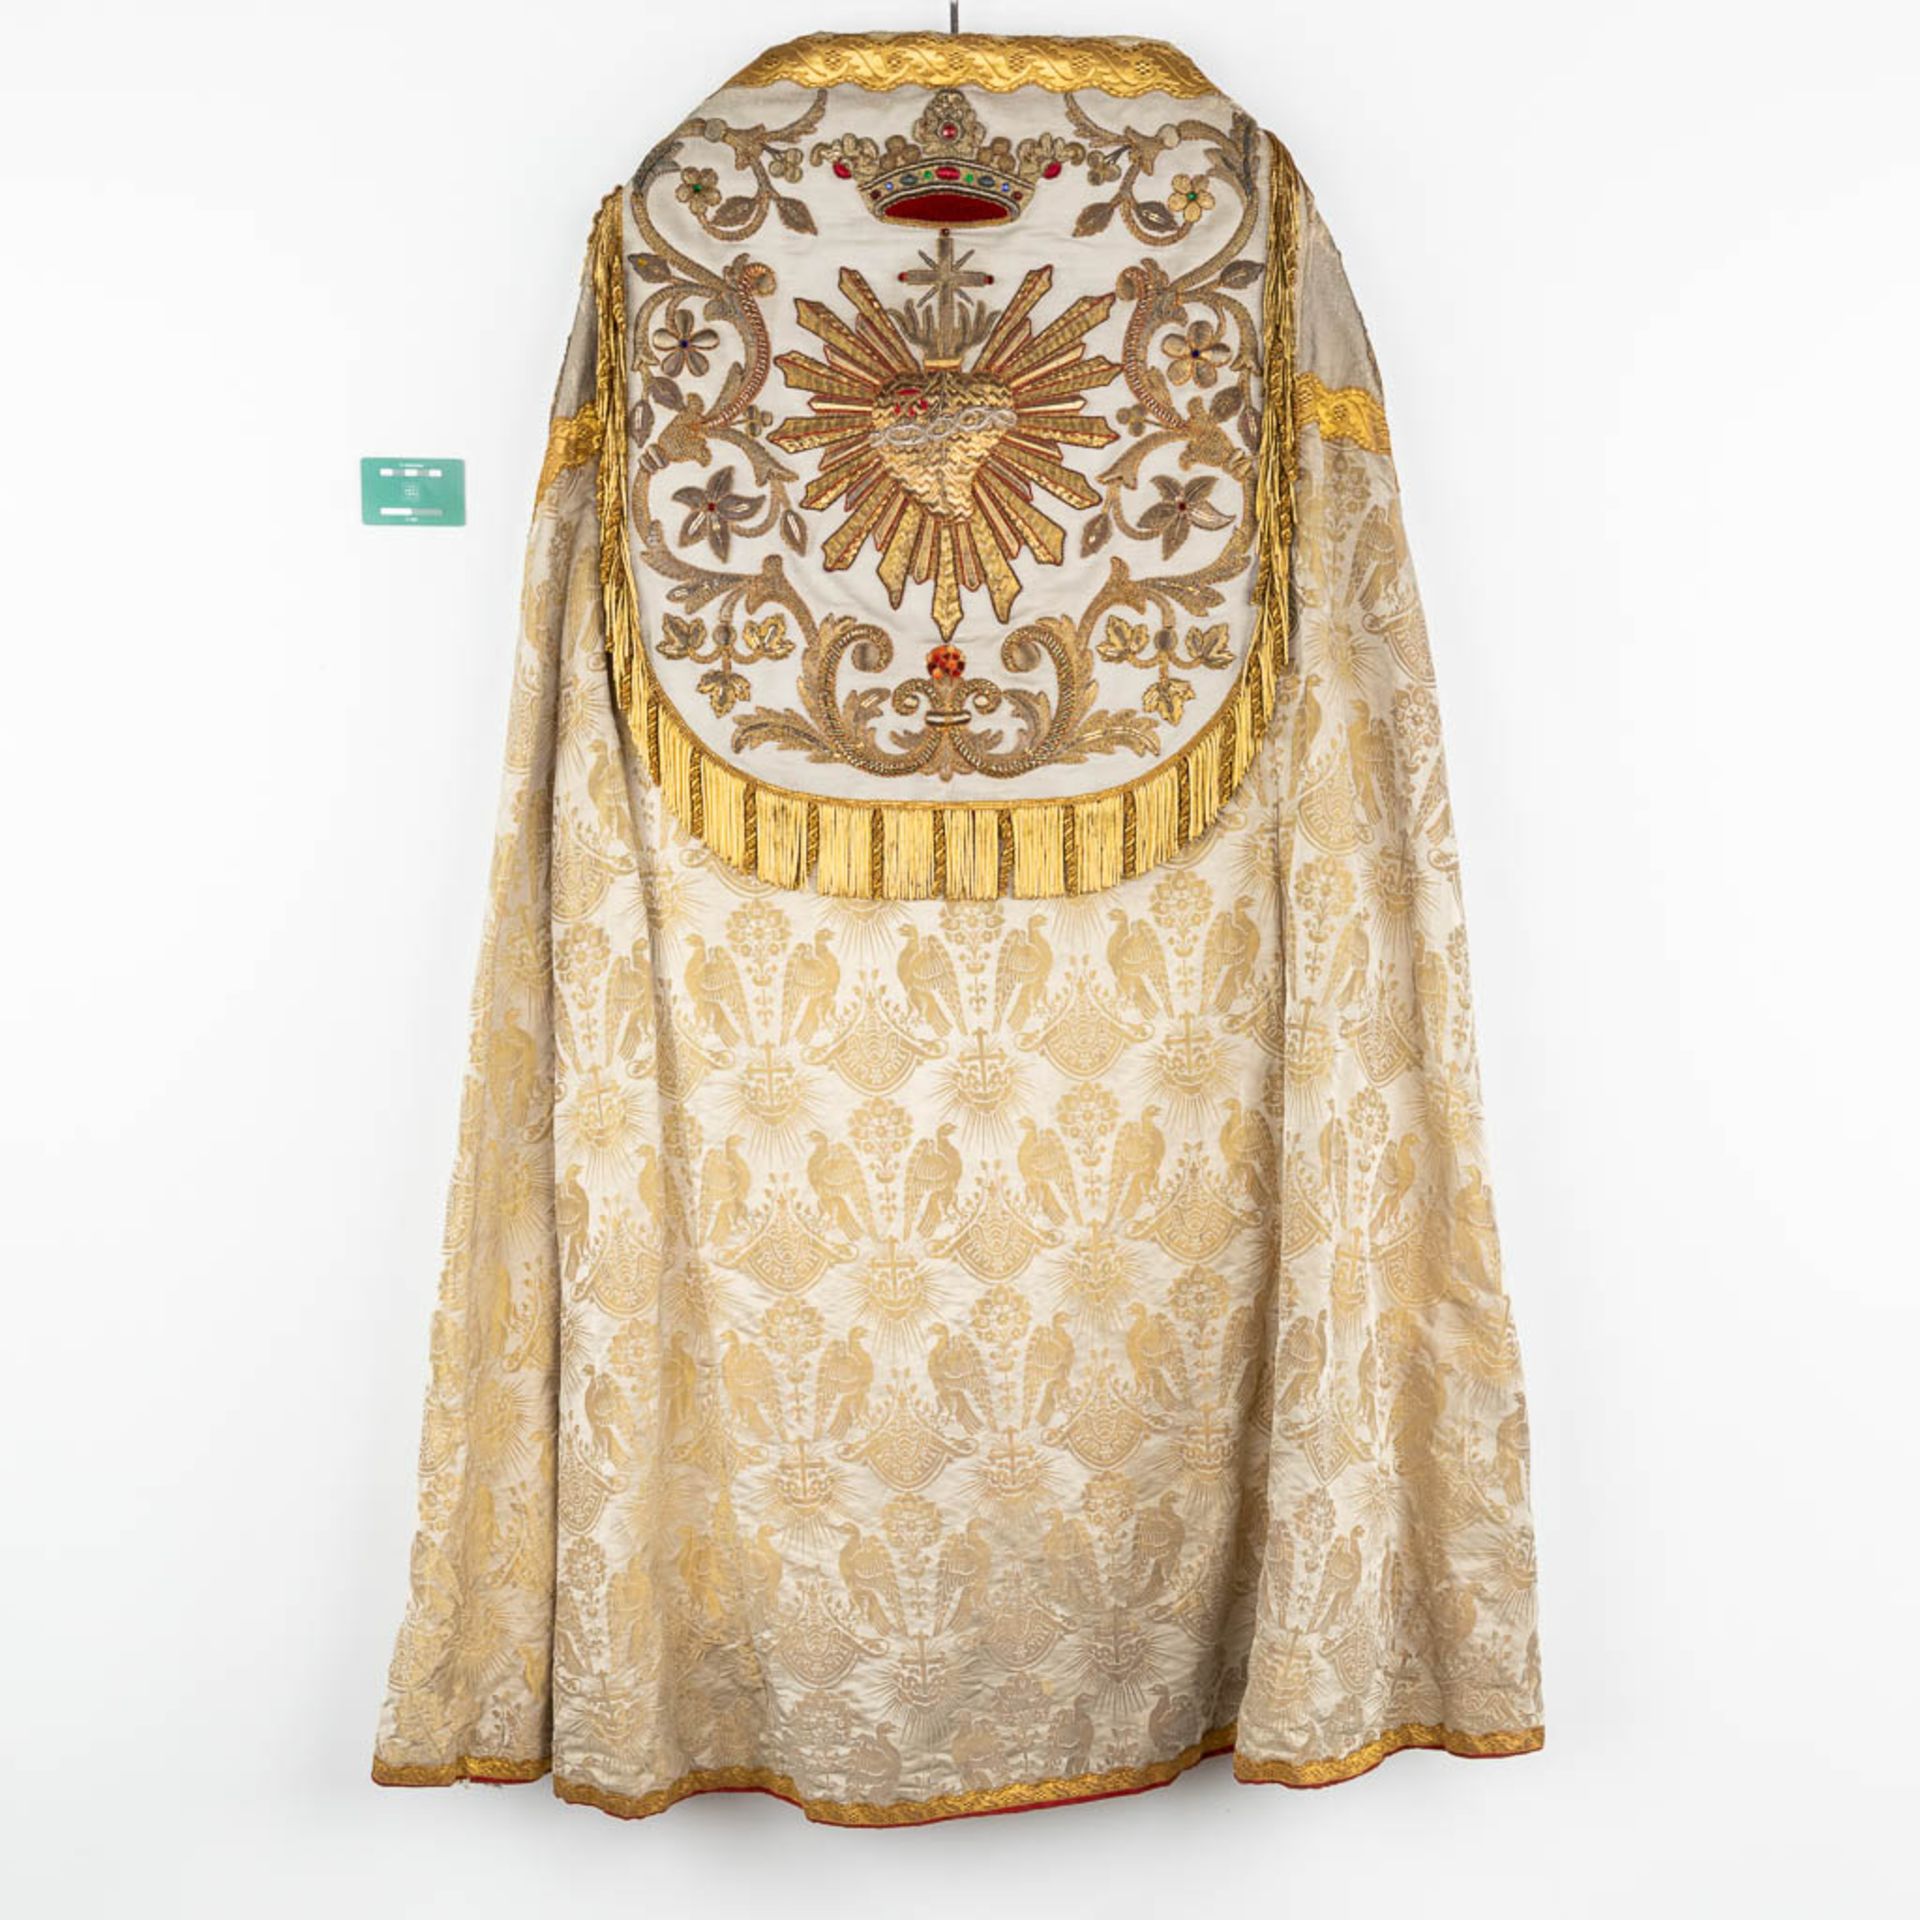 An antique cope, thick gold thread embroideries and decorated fabric. 19th C. (H:154 cm) - Image 2 of 8